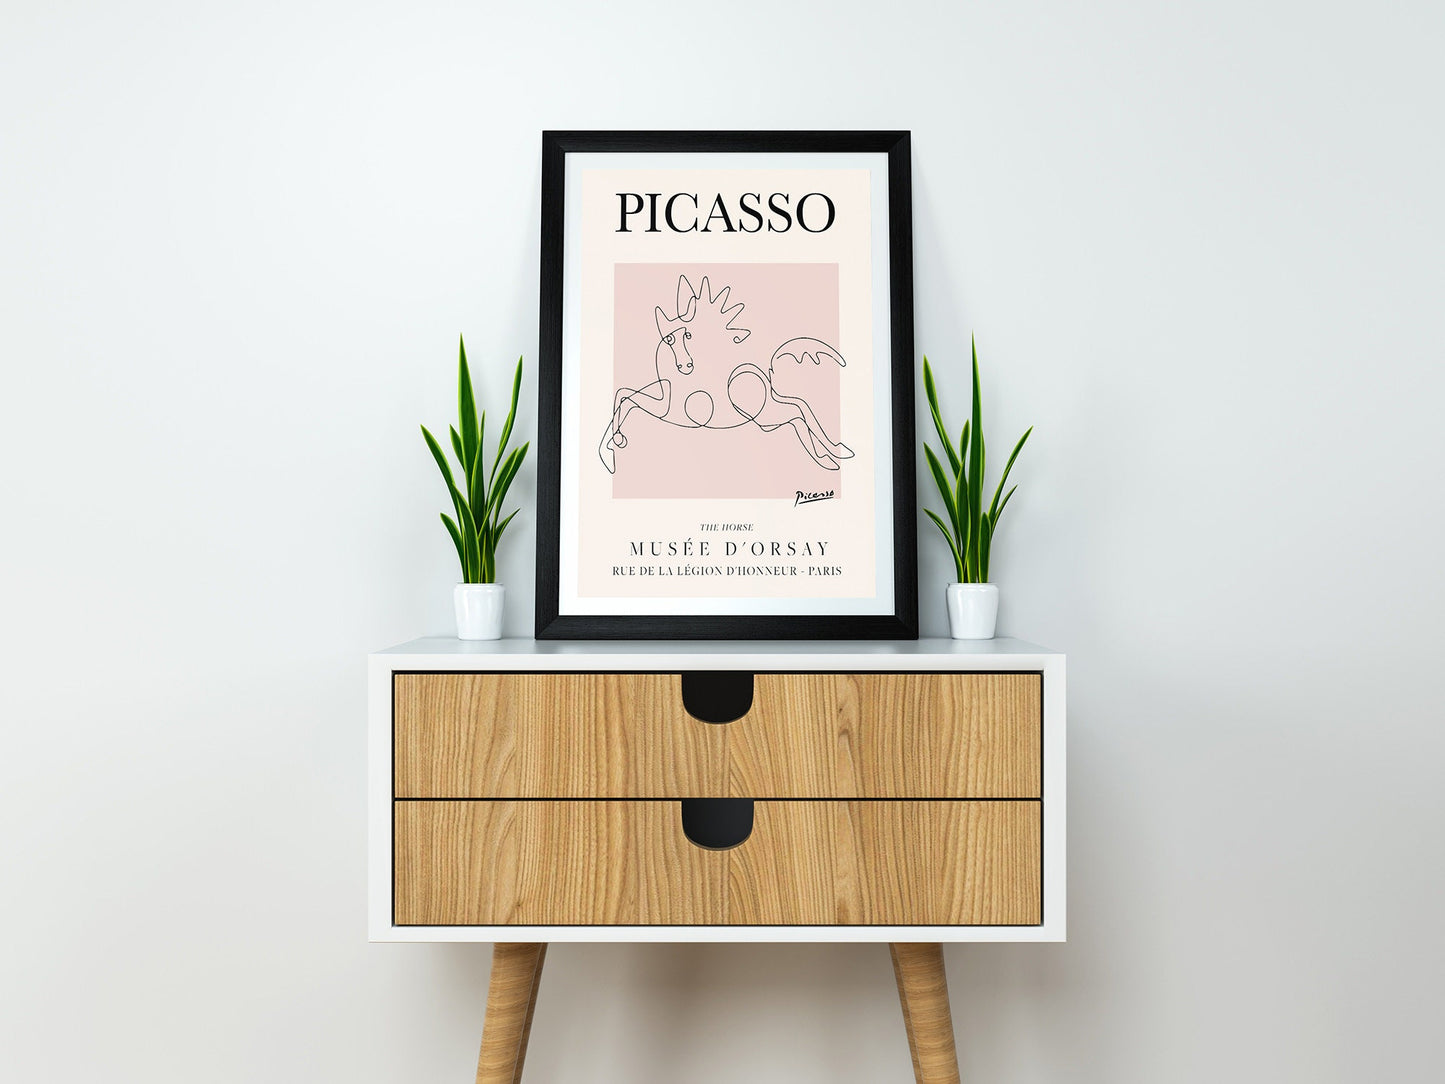 Picasso - The Horse I Exhibition Poster - Vintage Line Art Poster, Minimalist Line Drawing, Ideal Home Decor or Gift Print